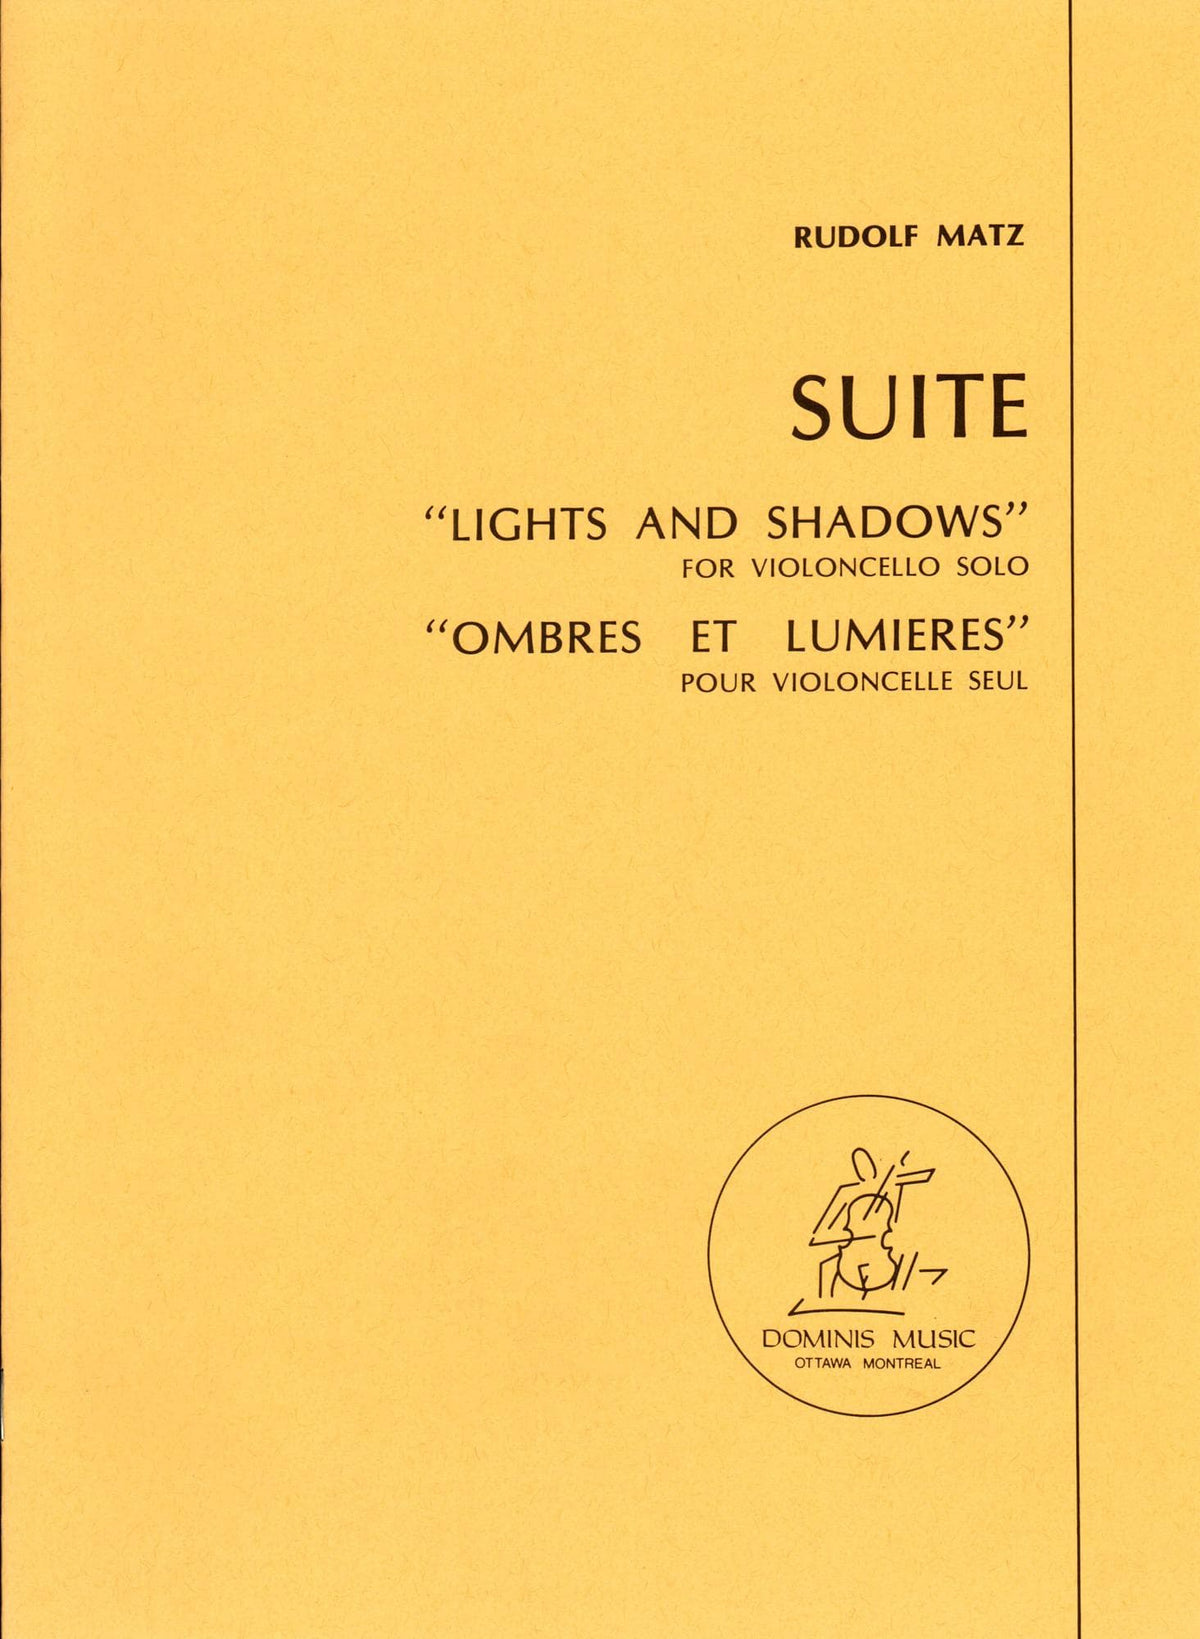 Matz, Rudolf - Suite: "Lights and Shadows" - Cello solo - Dominis Music Edition